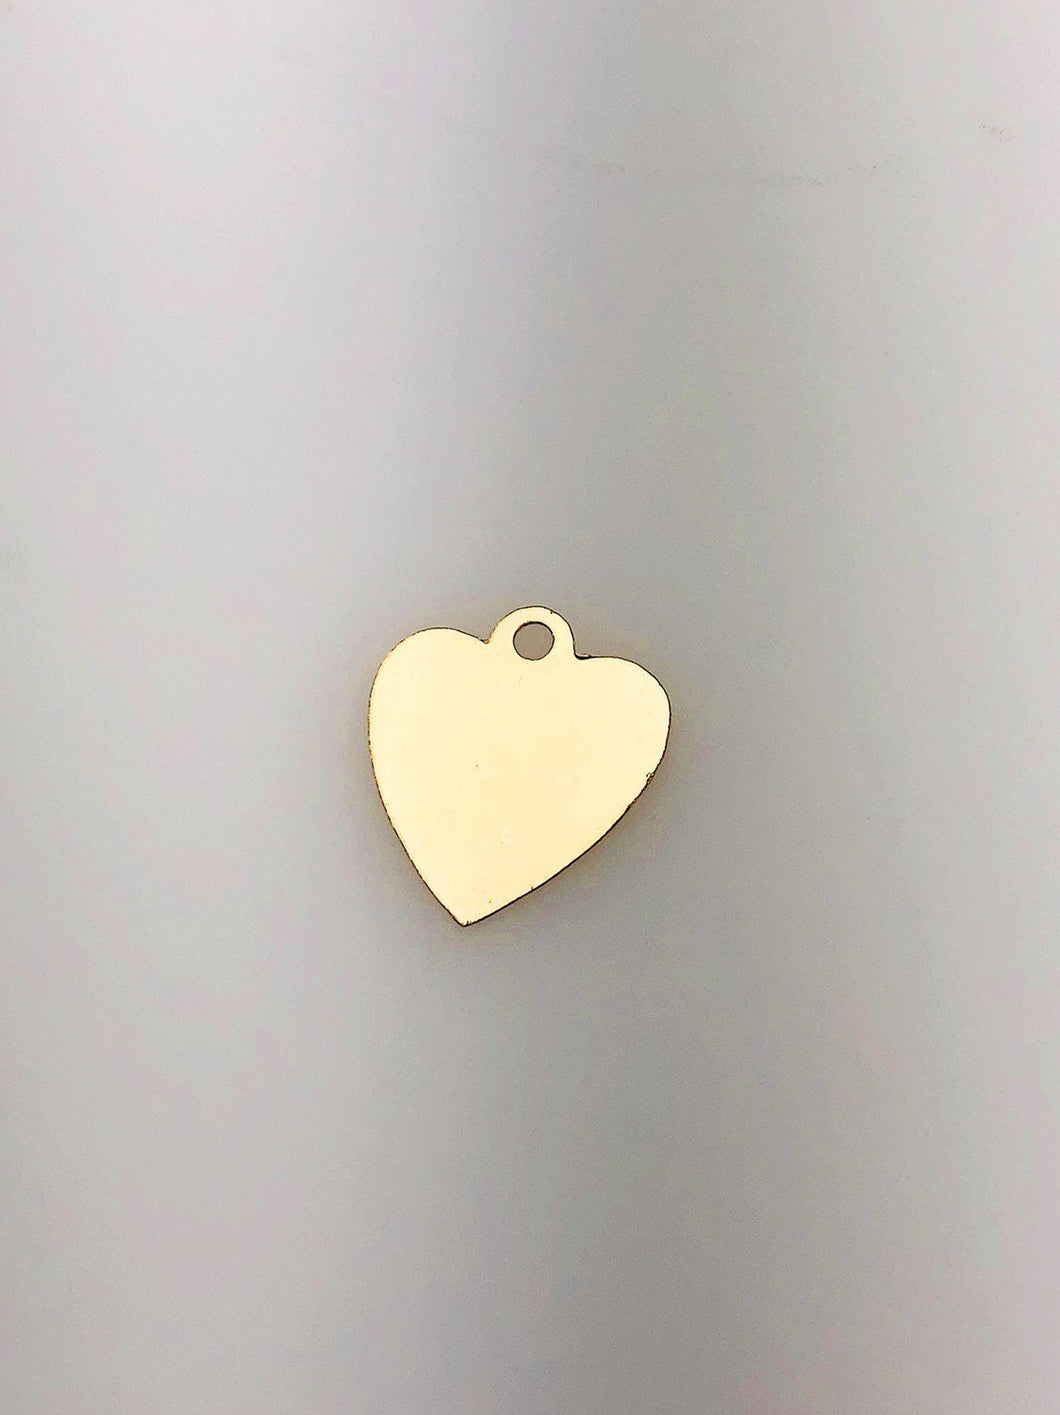 14K Gold Fill Heart Tag Charm w/ Ring, 13.4mm, Made in USA - 825